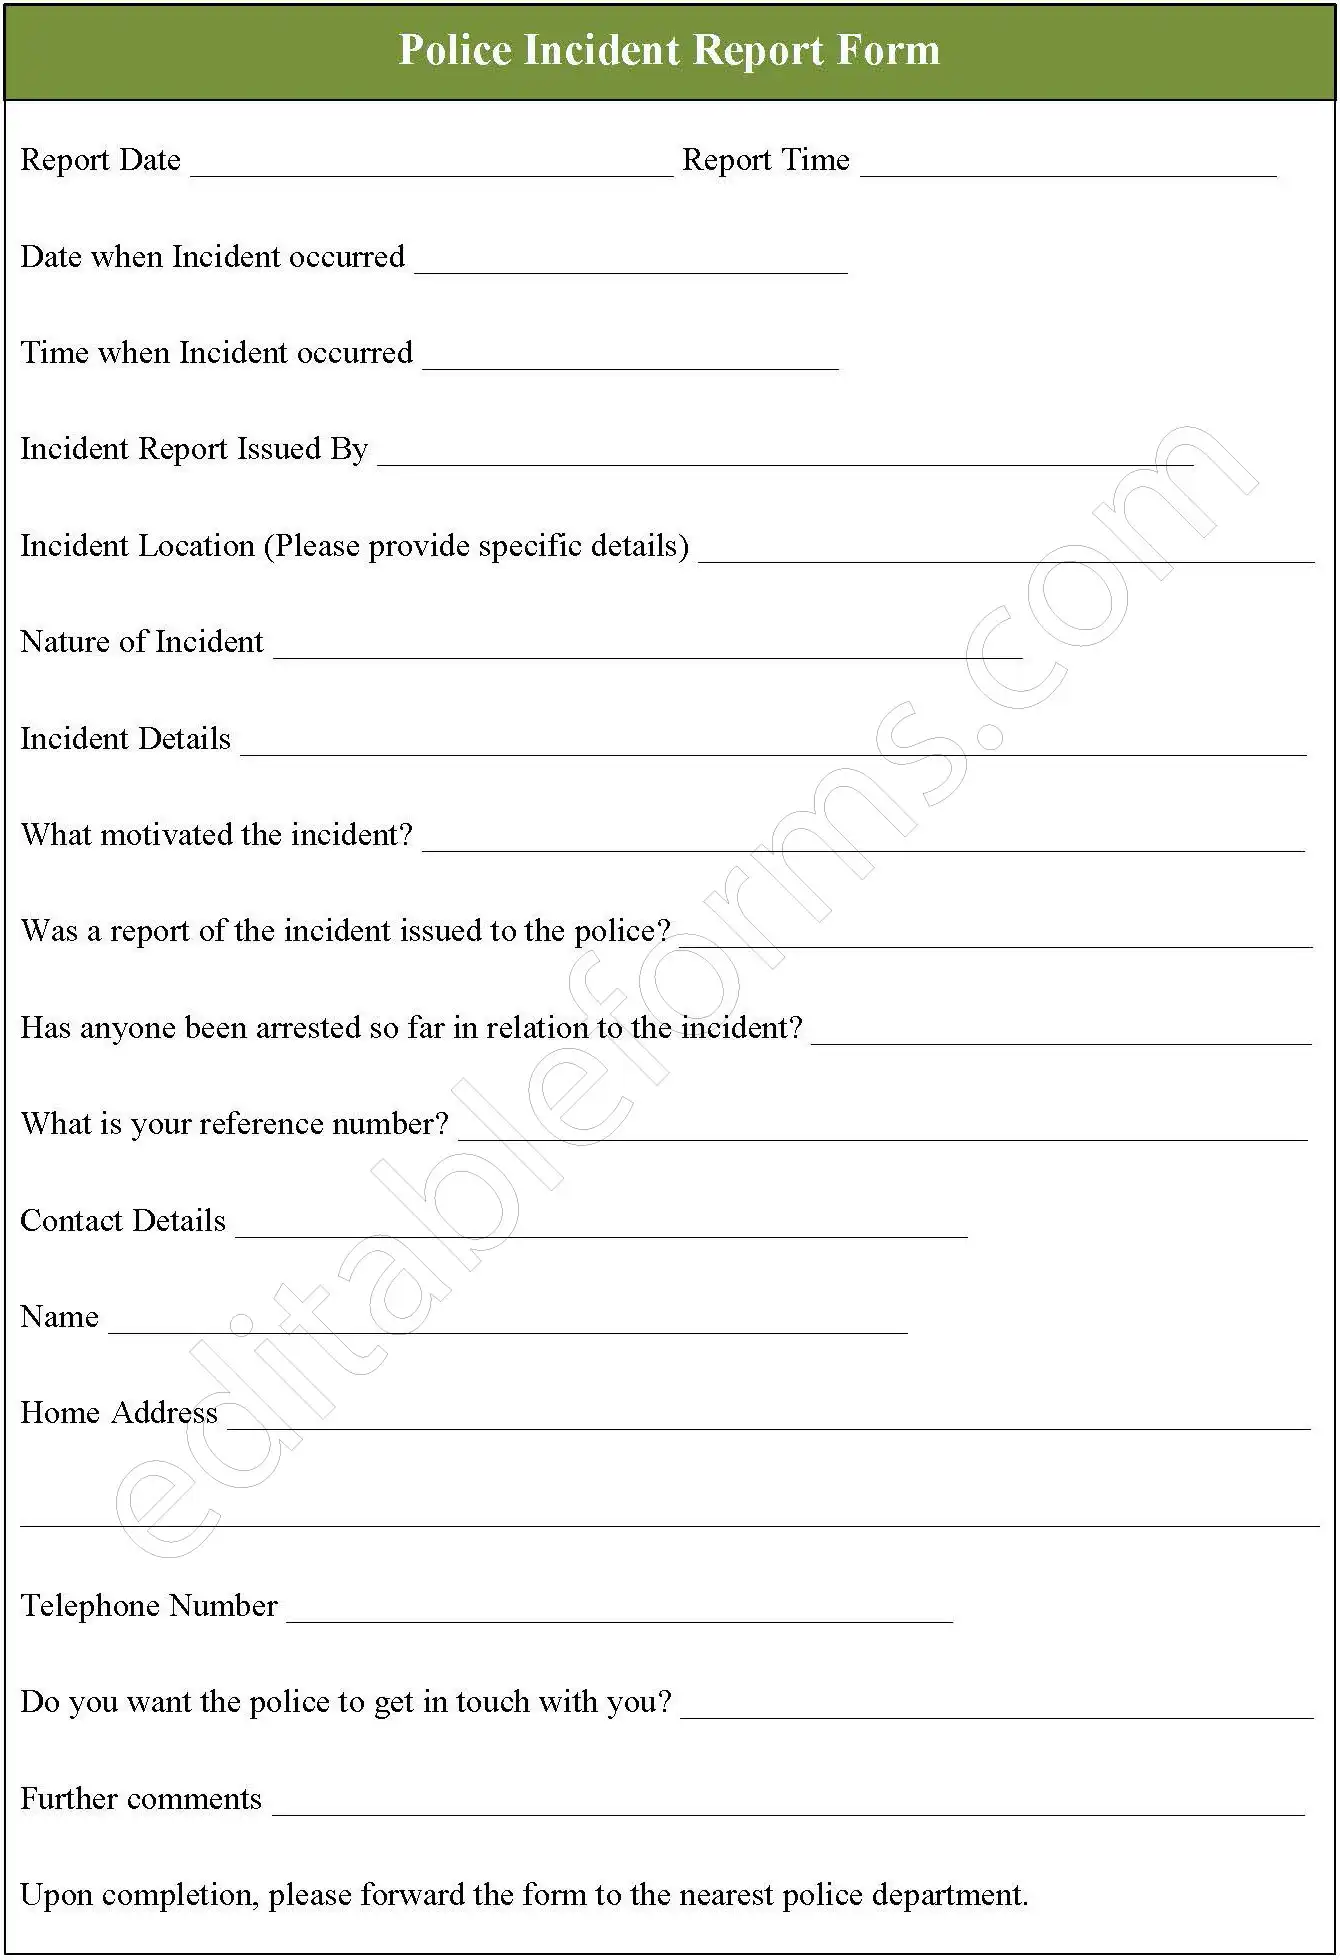 Police Incident Report Fillable PDF Template